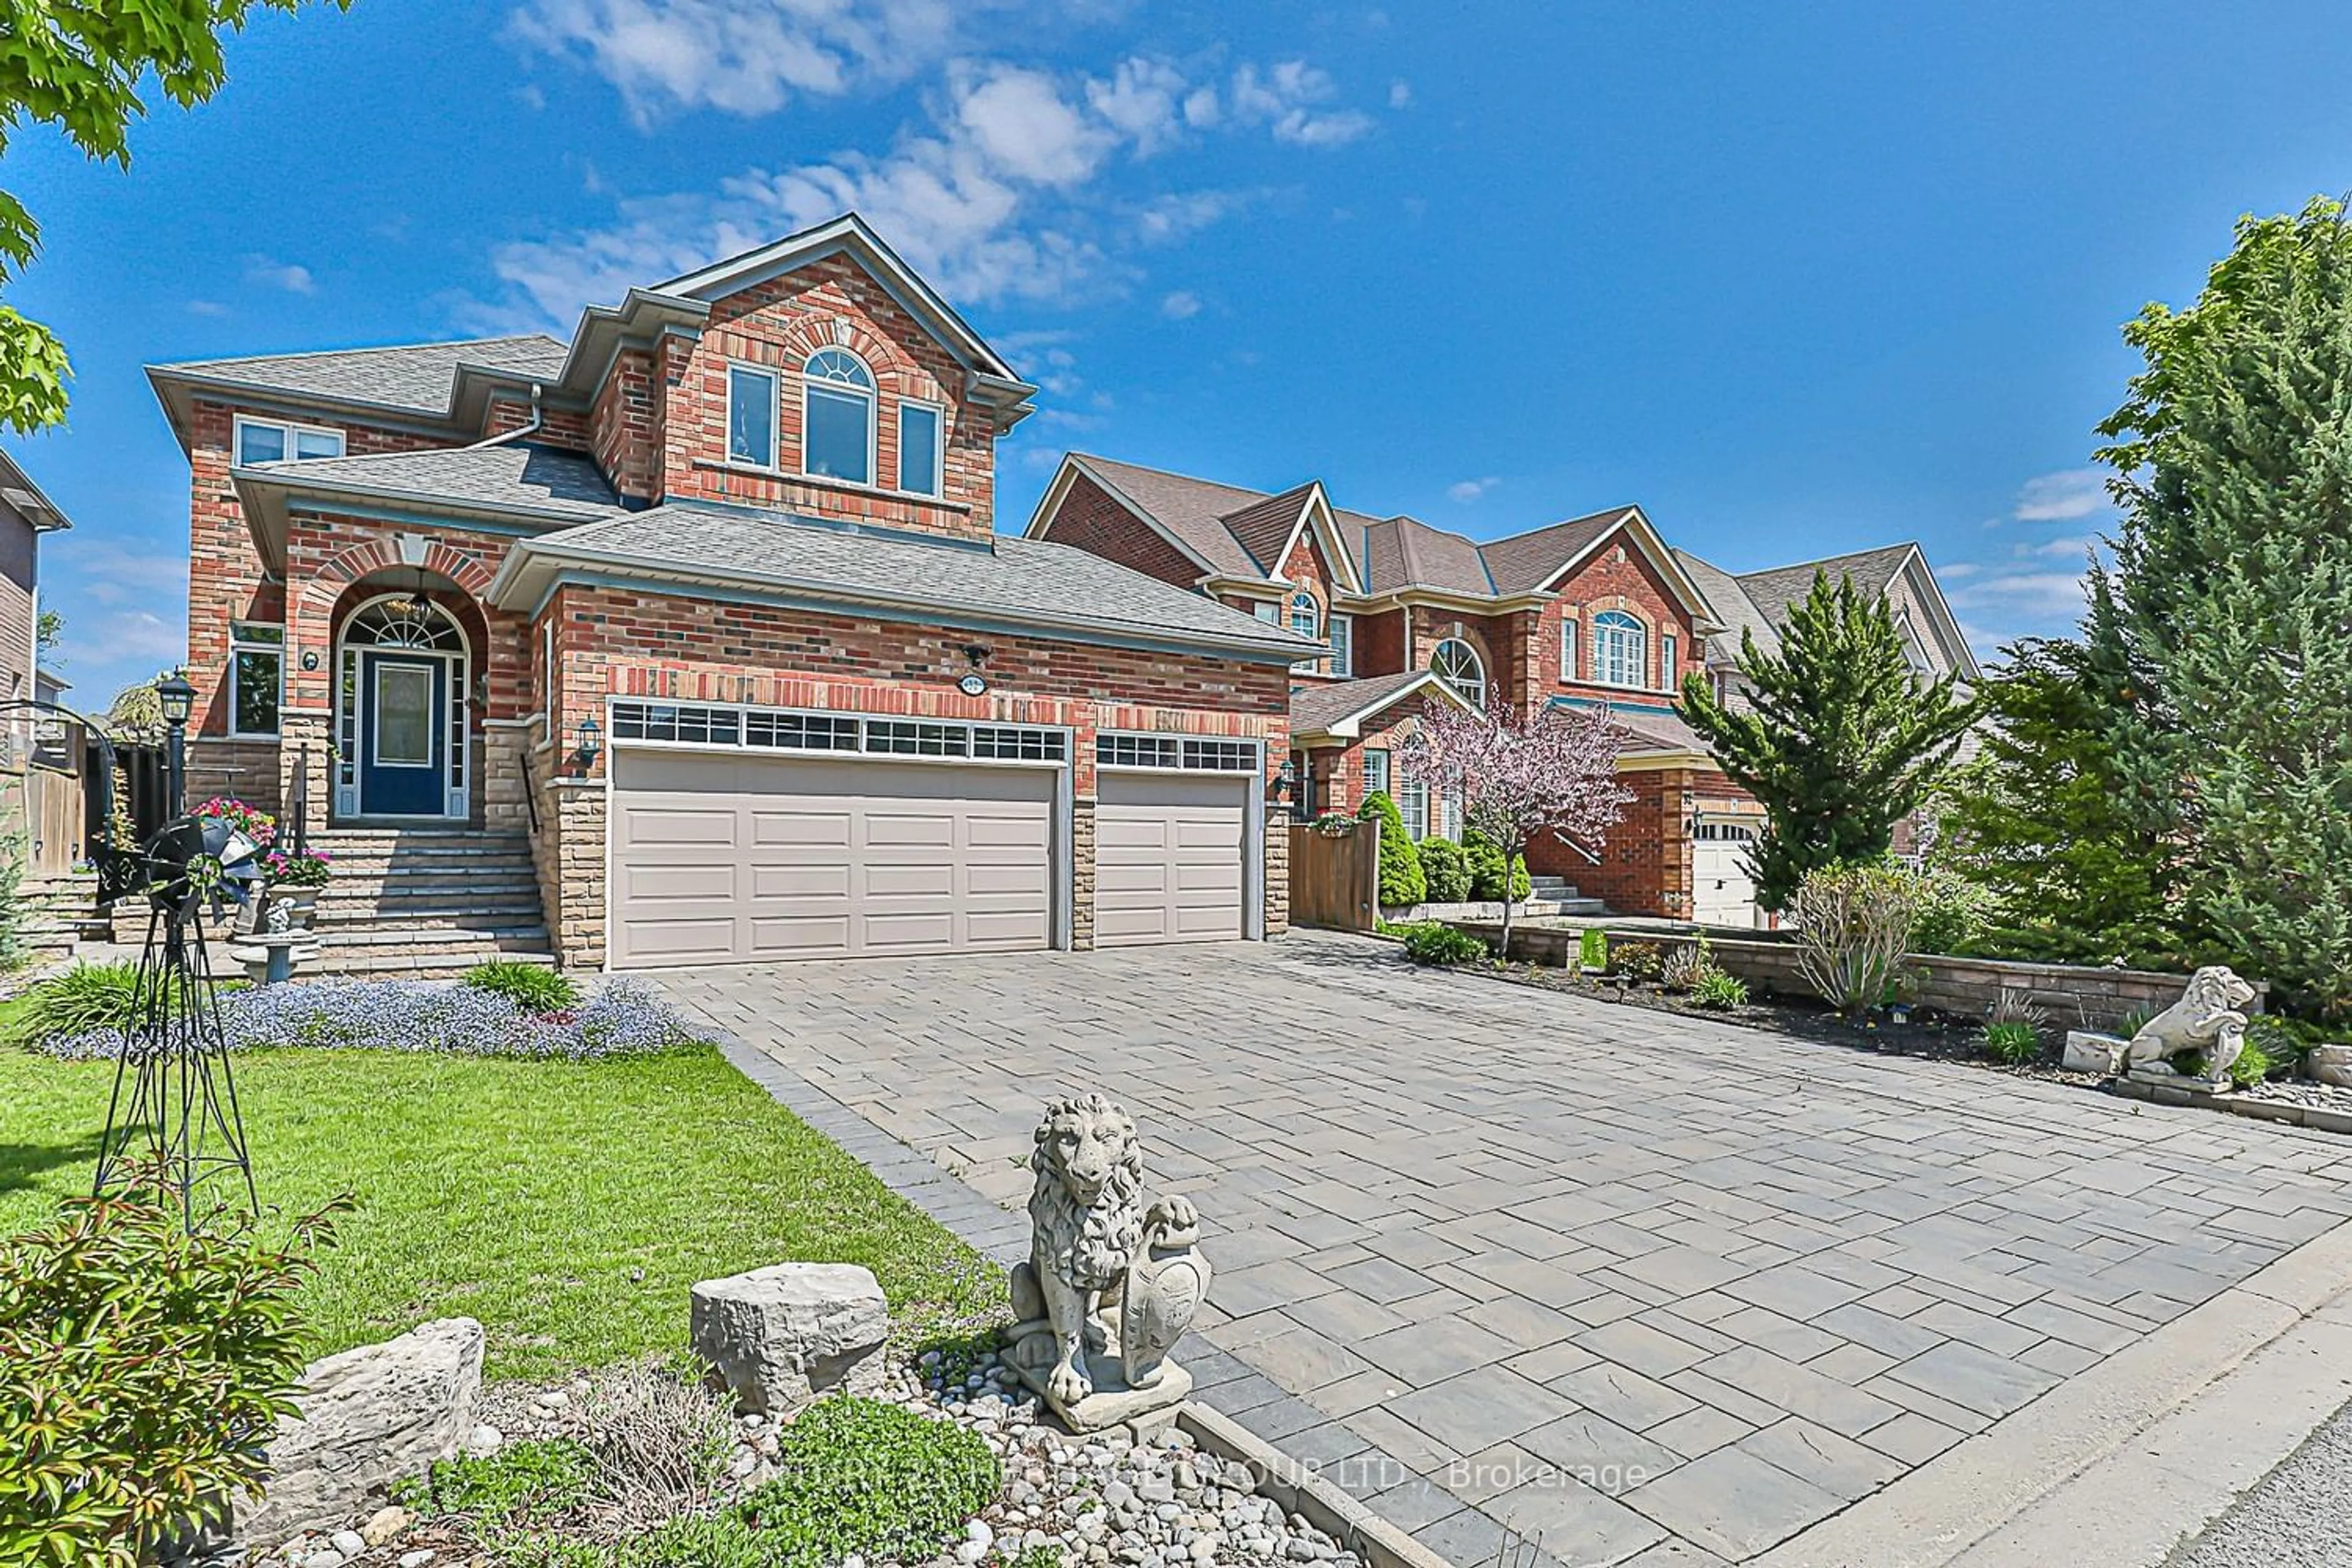 Home with brick exterior material for 30 Green Meadow Cres, Richmond Hill Ontario L4E 3W7